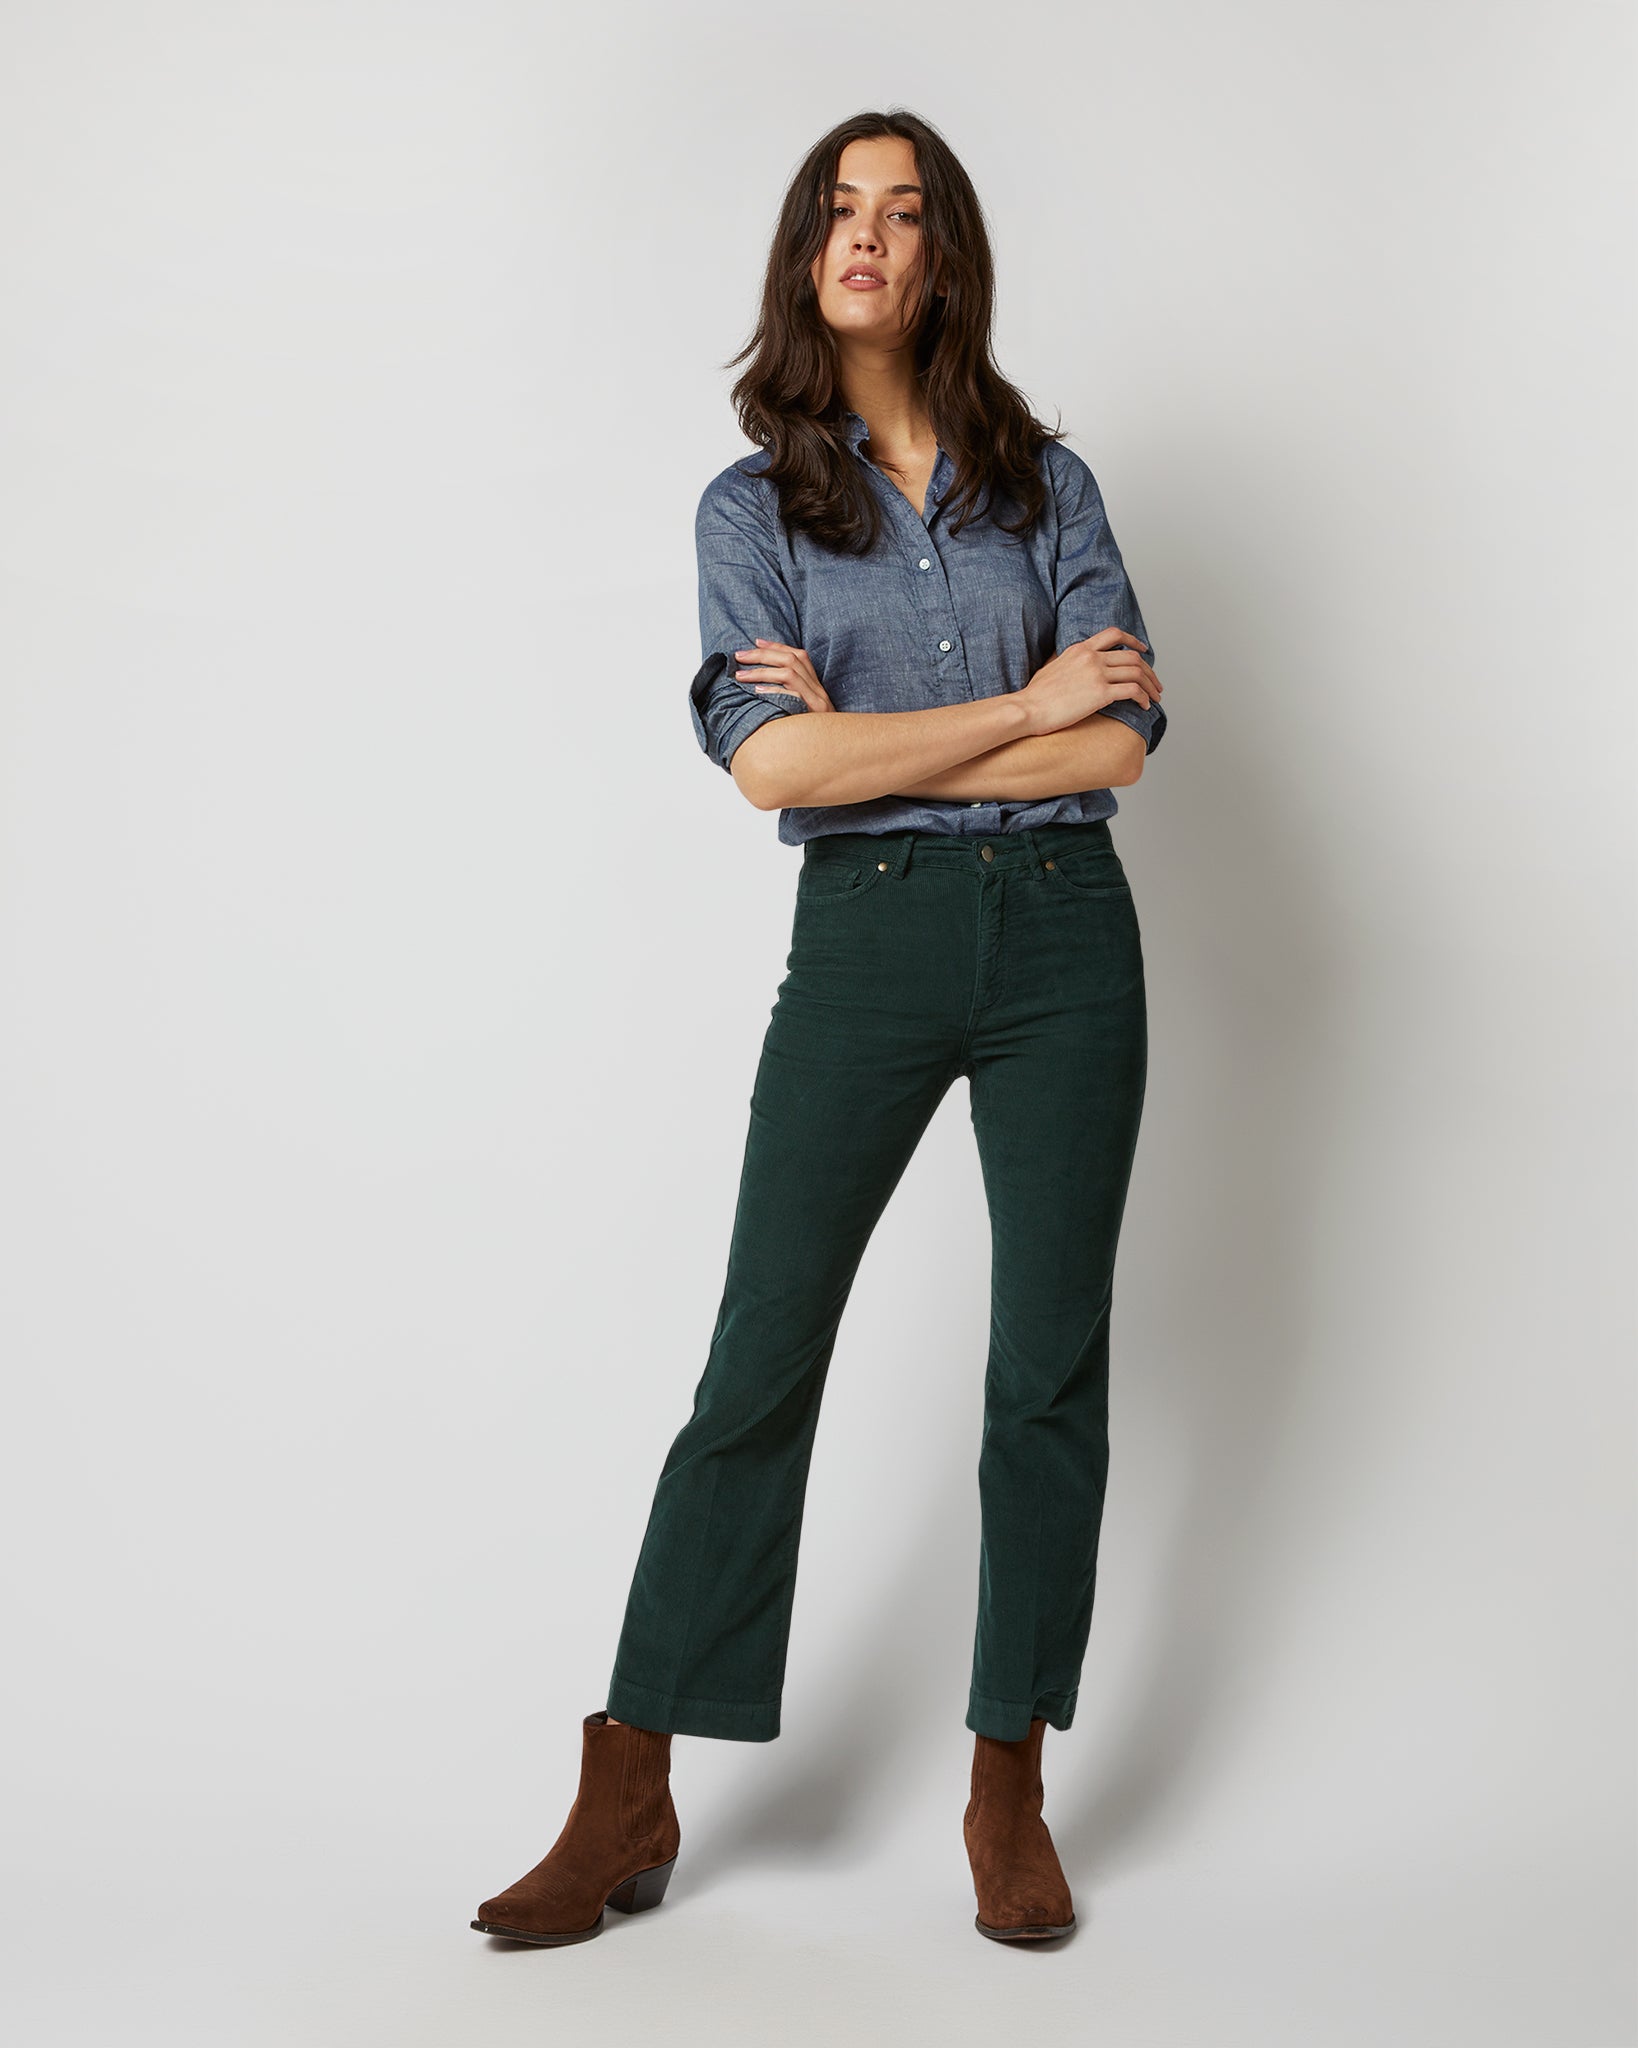 Kendall Flare 5-Pocket Pant in Hunter Stretch Cord